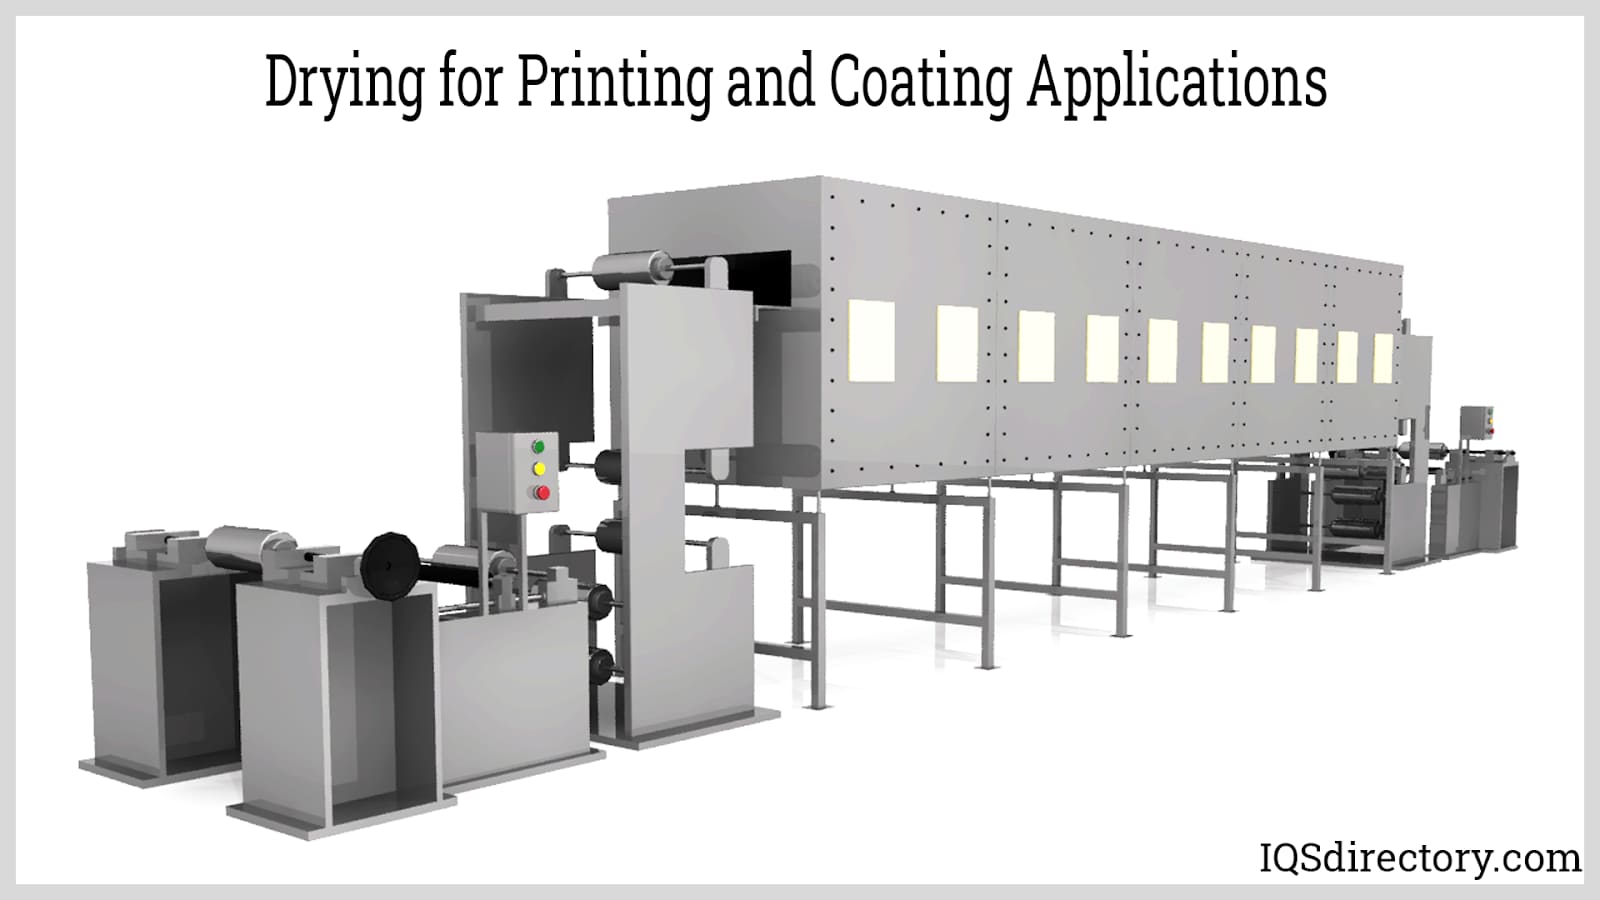 Dryer for Printing and Coating